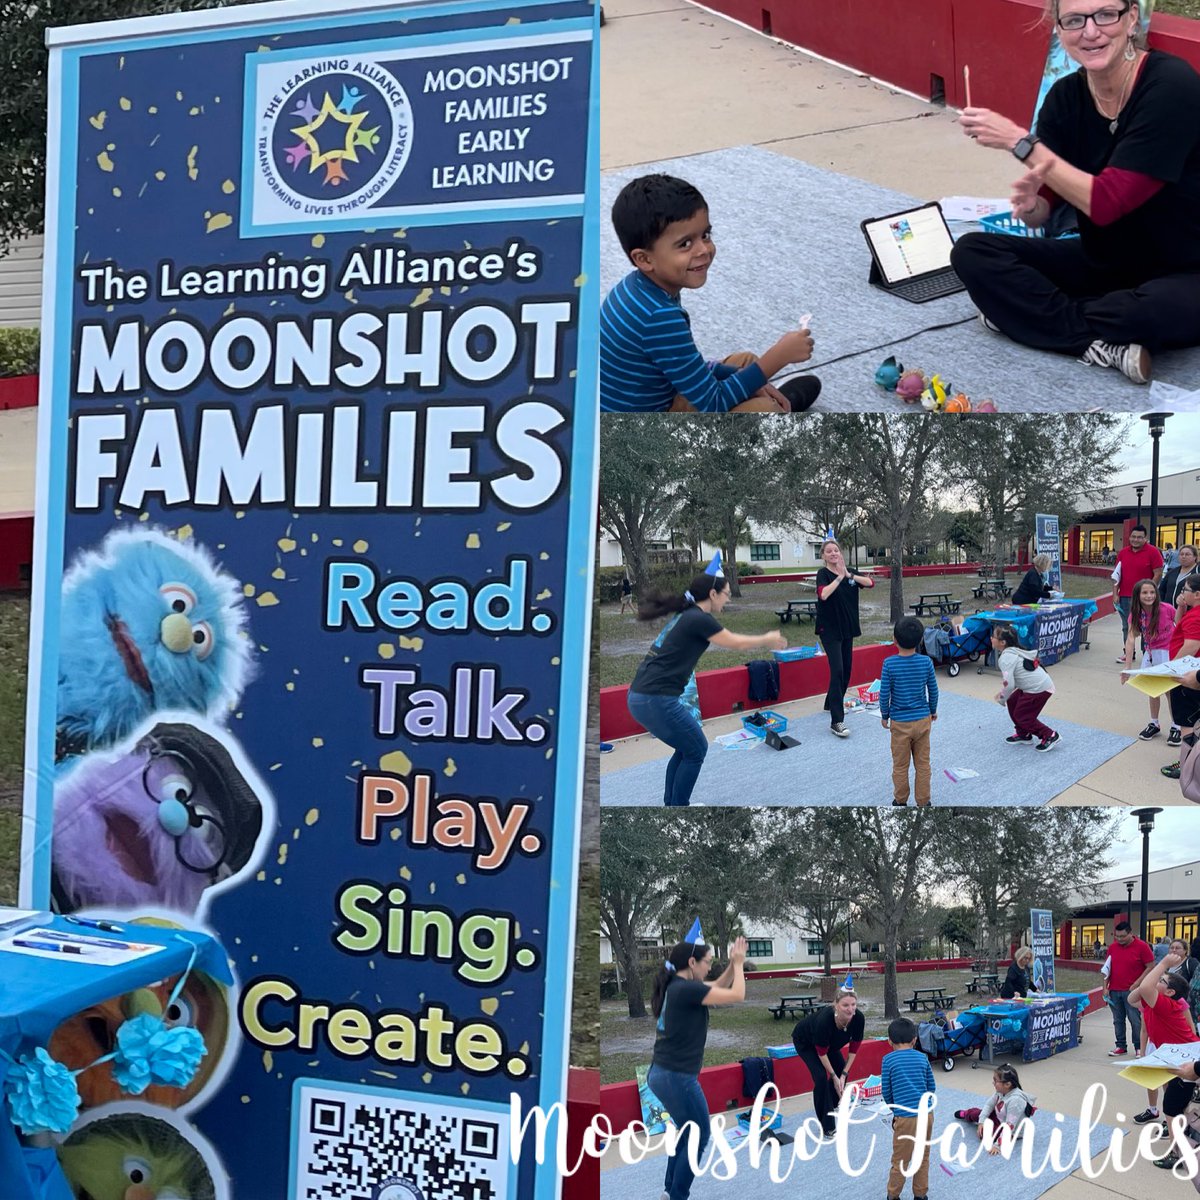 Tonight we took a #deepdiveintoliteracy with our @verobeachelem families for #FLCelebratesLiteracy Week. Parents learned strategies and got fun reading activities to do with their child at home! Our @TLA_Moonshot friends even joined in on the fun! #vbevibe #familyengagement